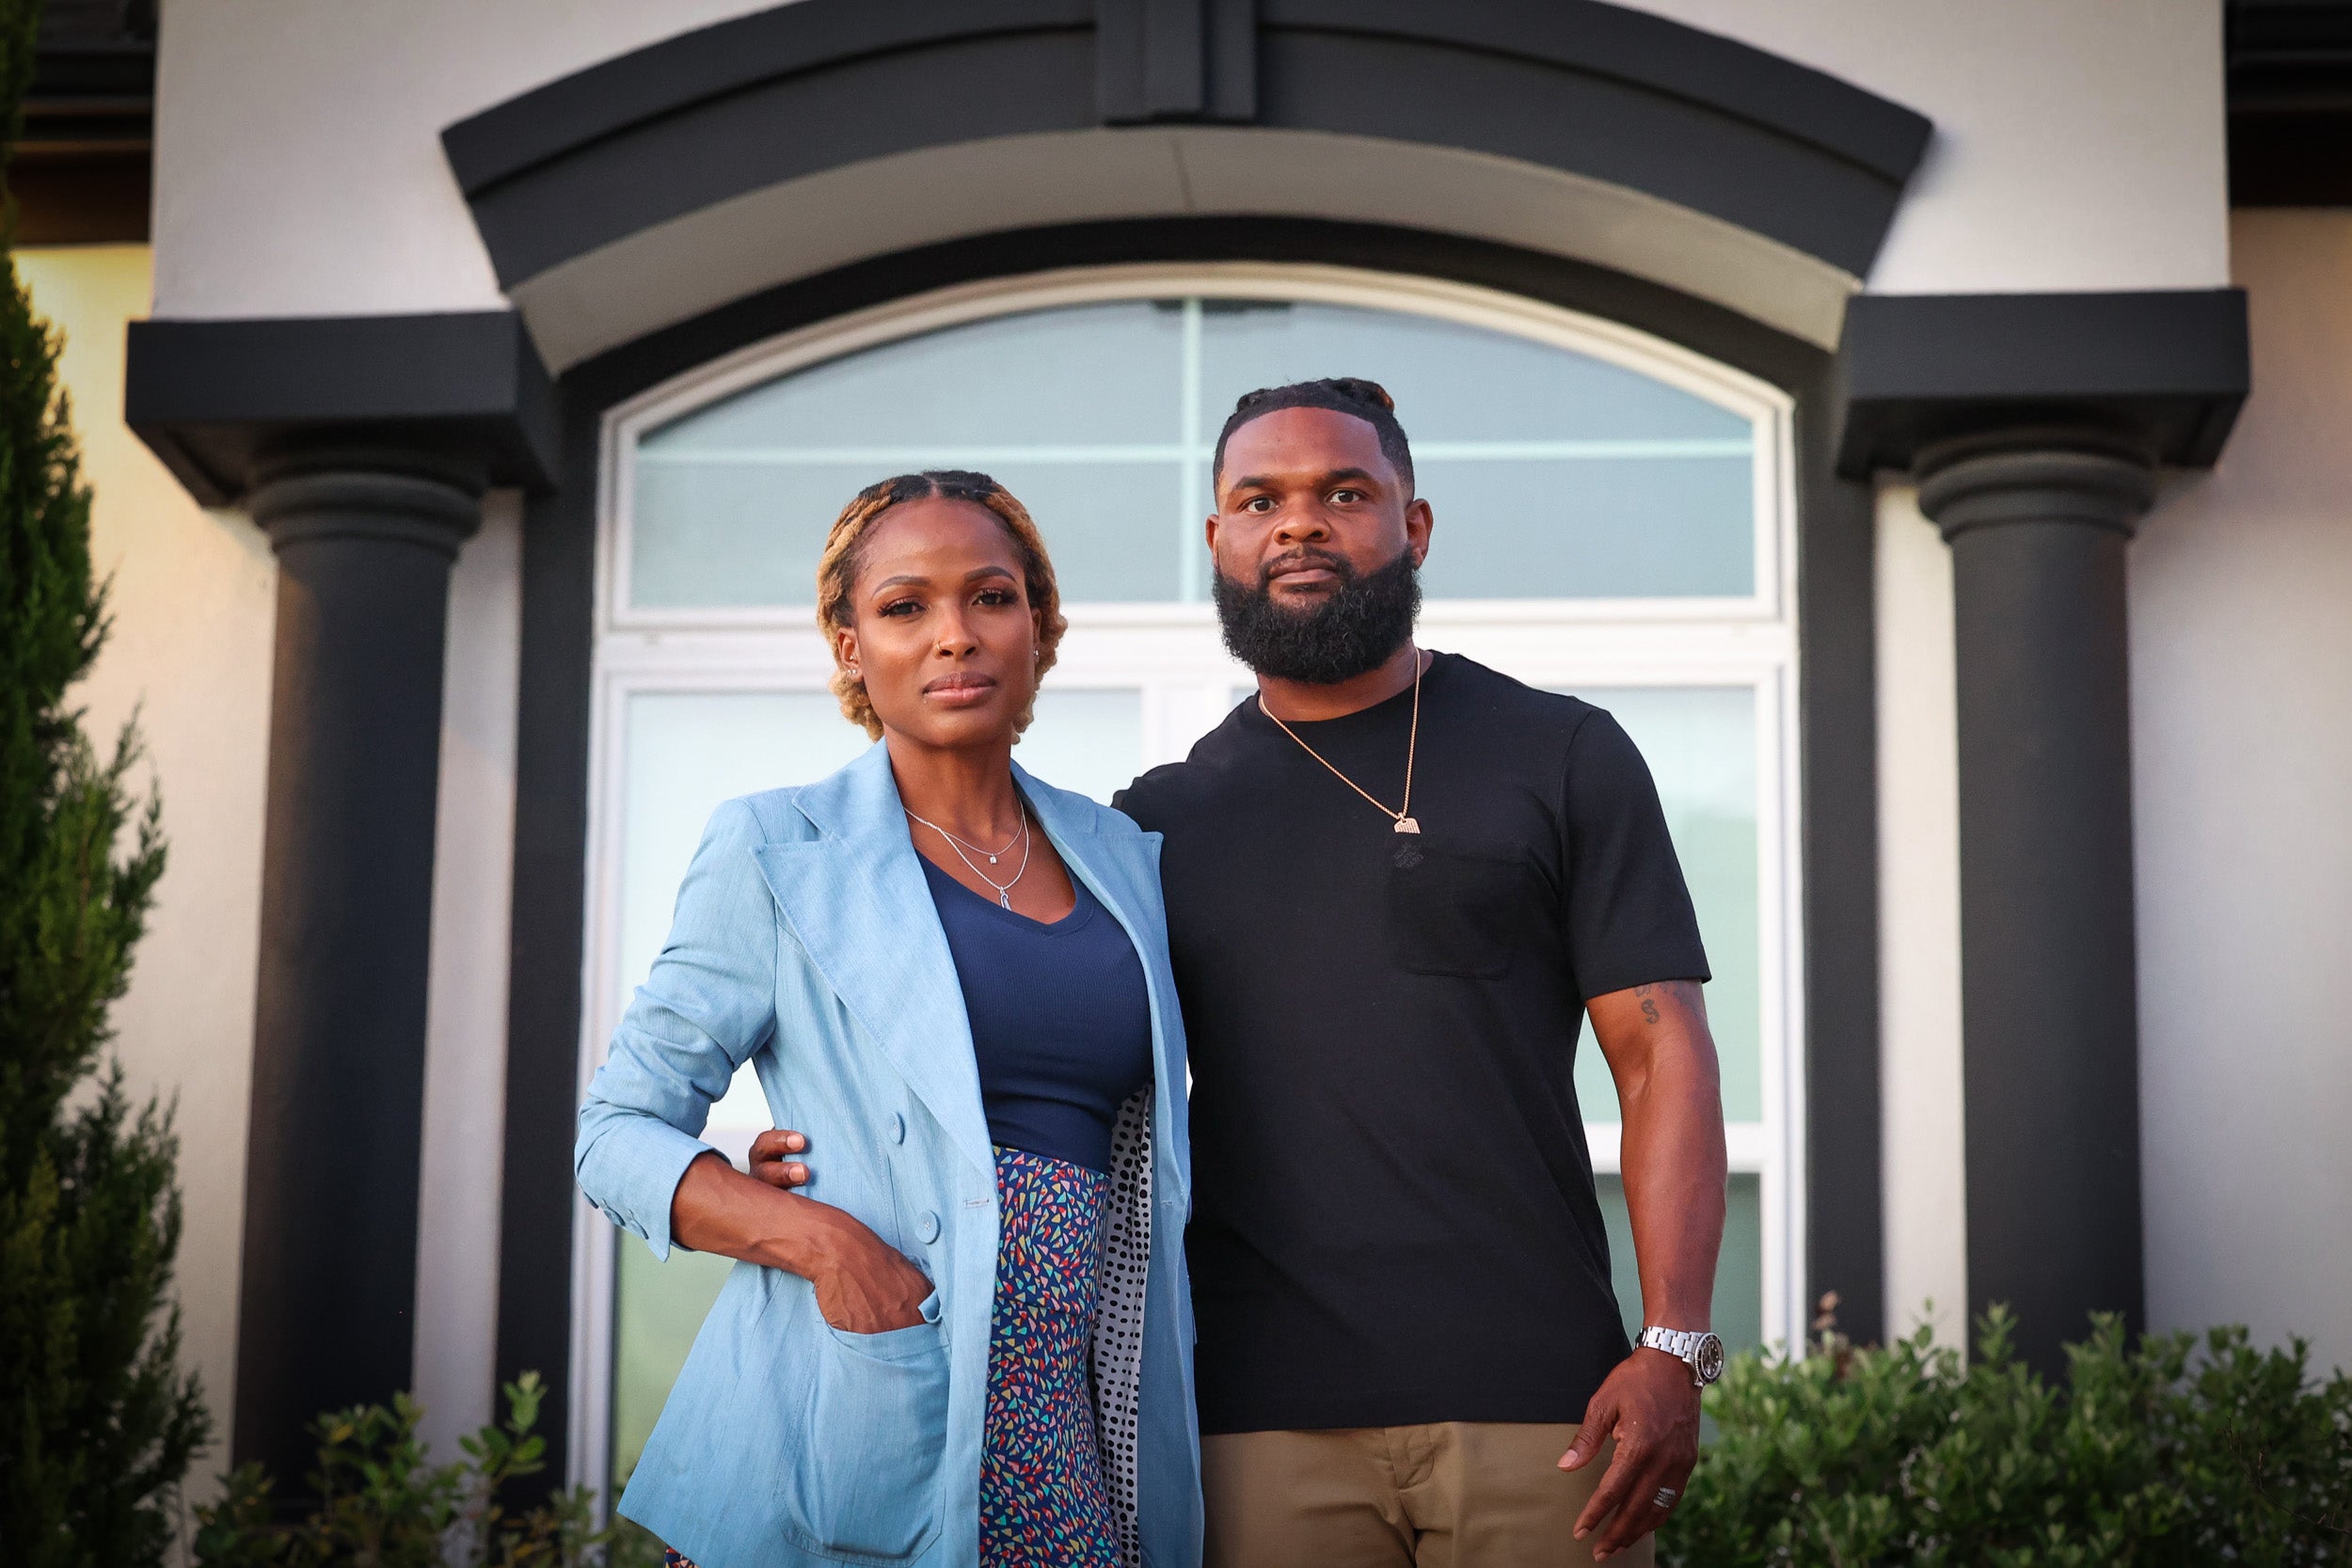 Black Family Sued Real Estate Companies After Being Denied Loan For Investment Property. Judge Rules They Aren't Protected By Fair Housing Act